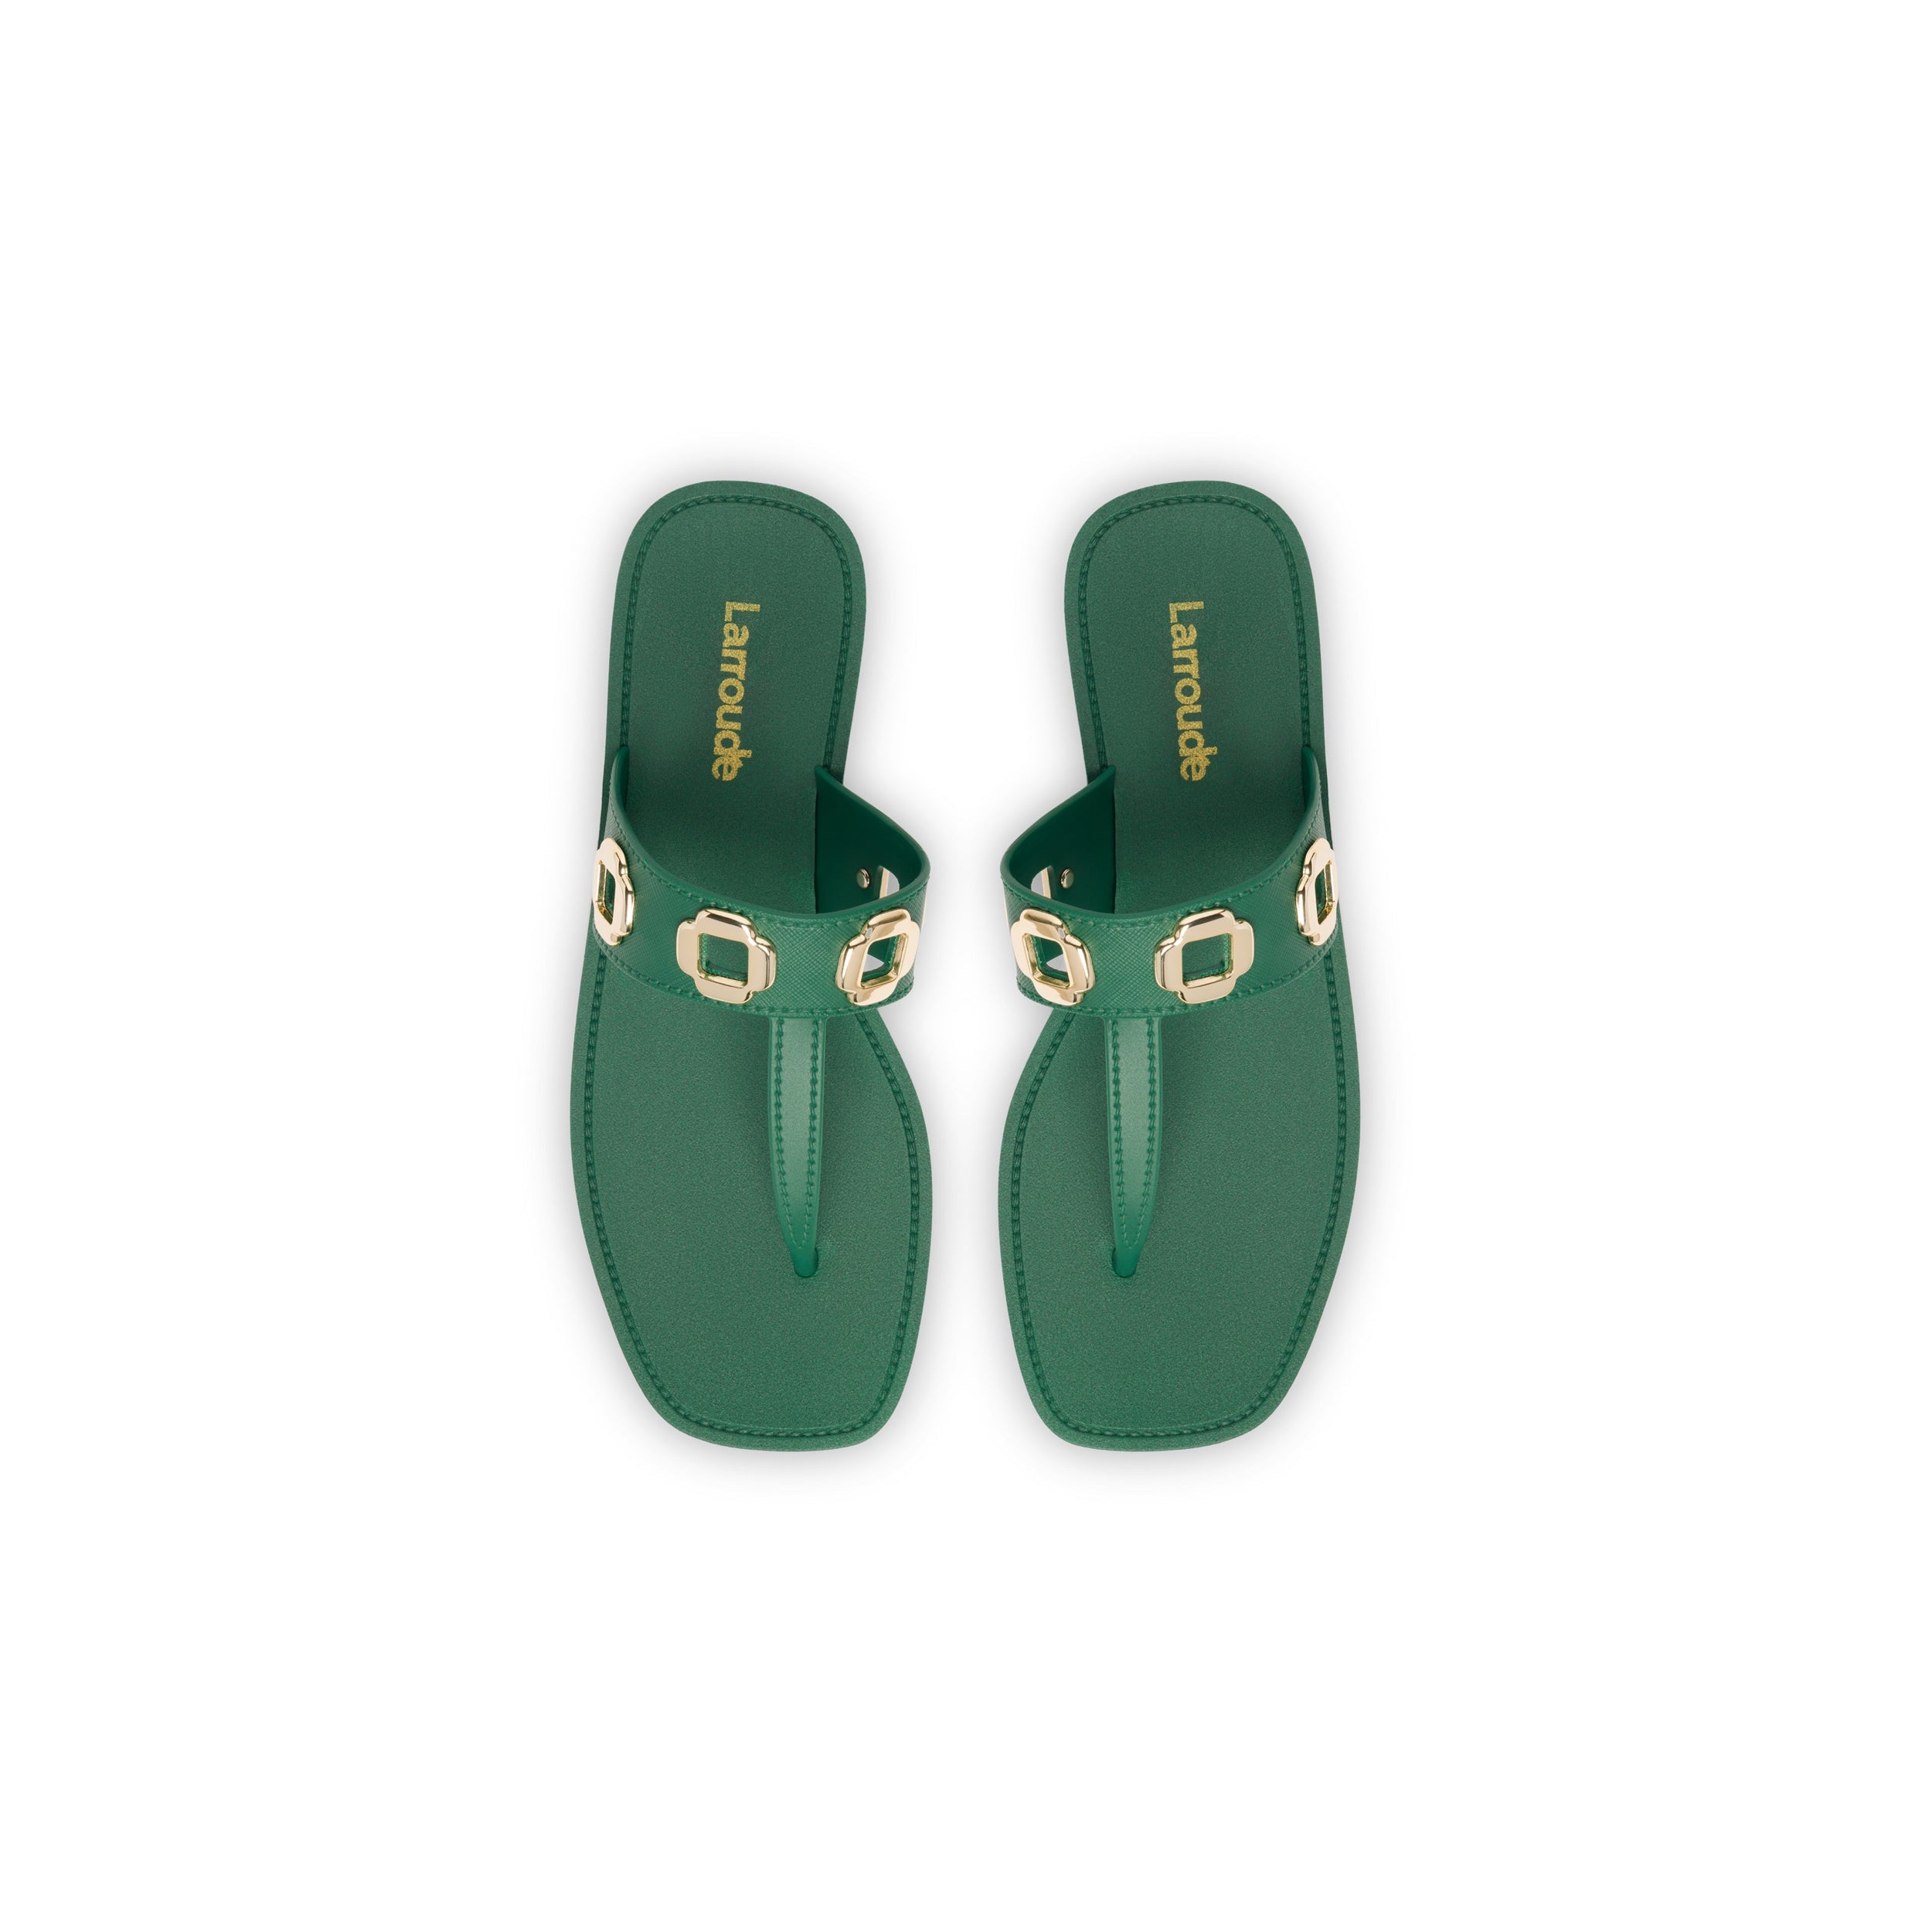 These Milan S sandals in Emerald PVC boast a minimalist square-toe design, featuring green thong straps adorned with rectangular gold-tone buckle details. The insole, emblazoned with the "Larroude" brand name in gold lettering, signifies their status as a Larroudé bestseller, making them ideal for any outing.